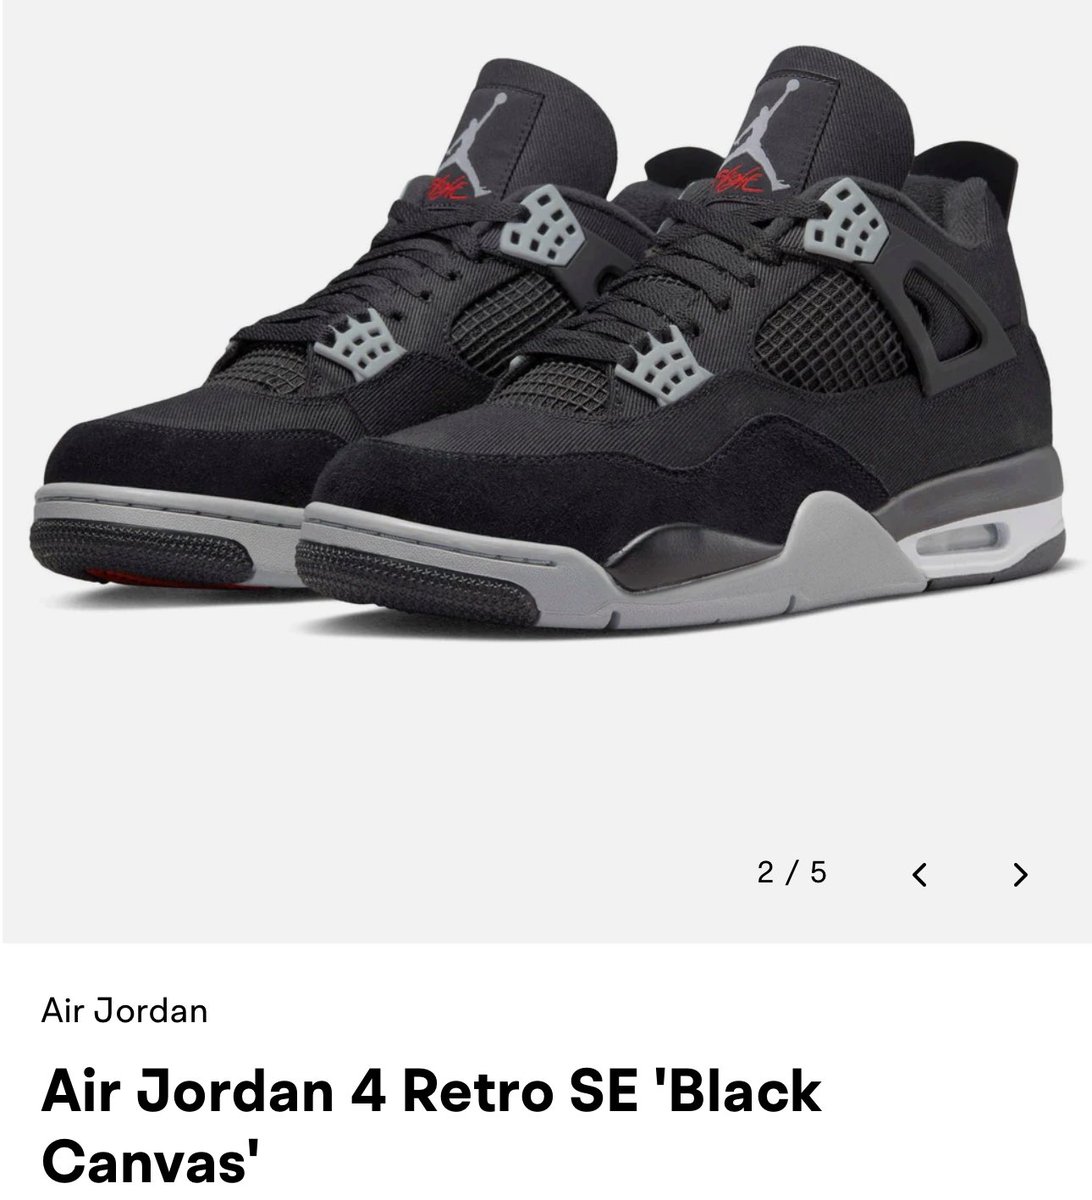 Anyone know a place to get Jordan 4s at near retail prices